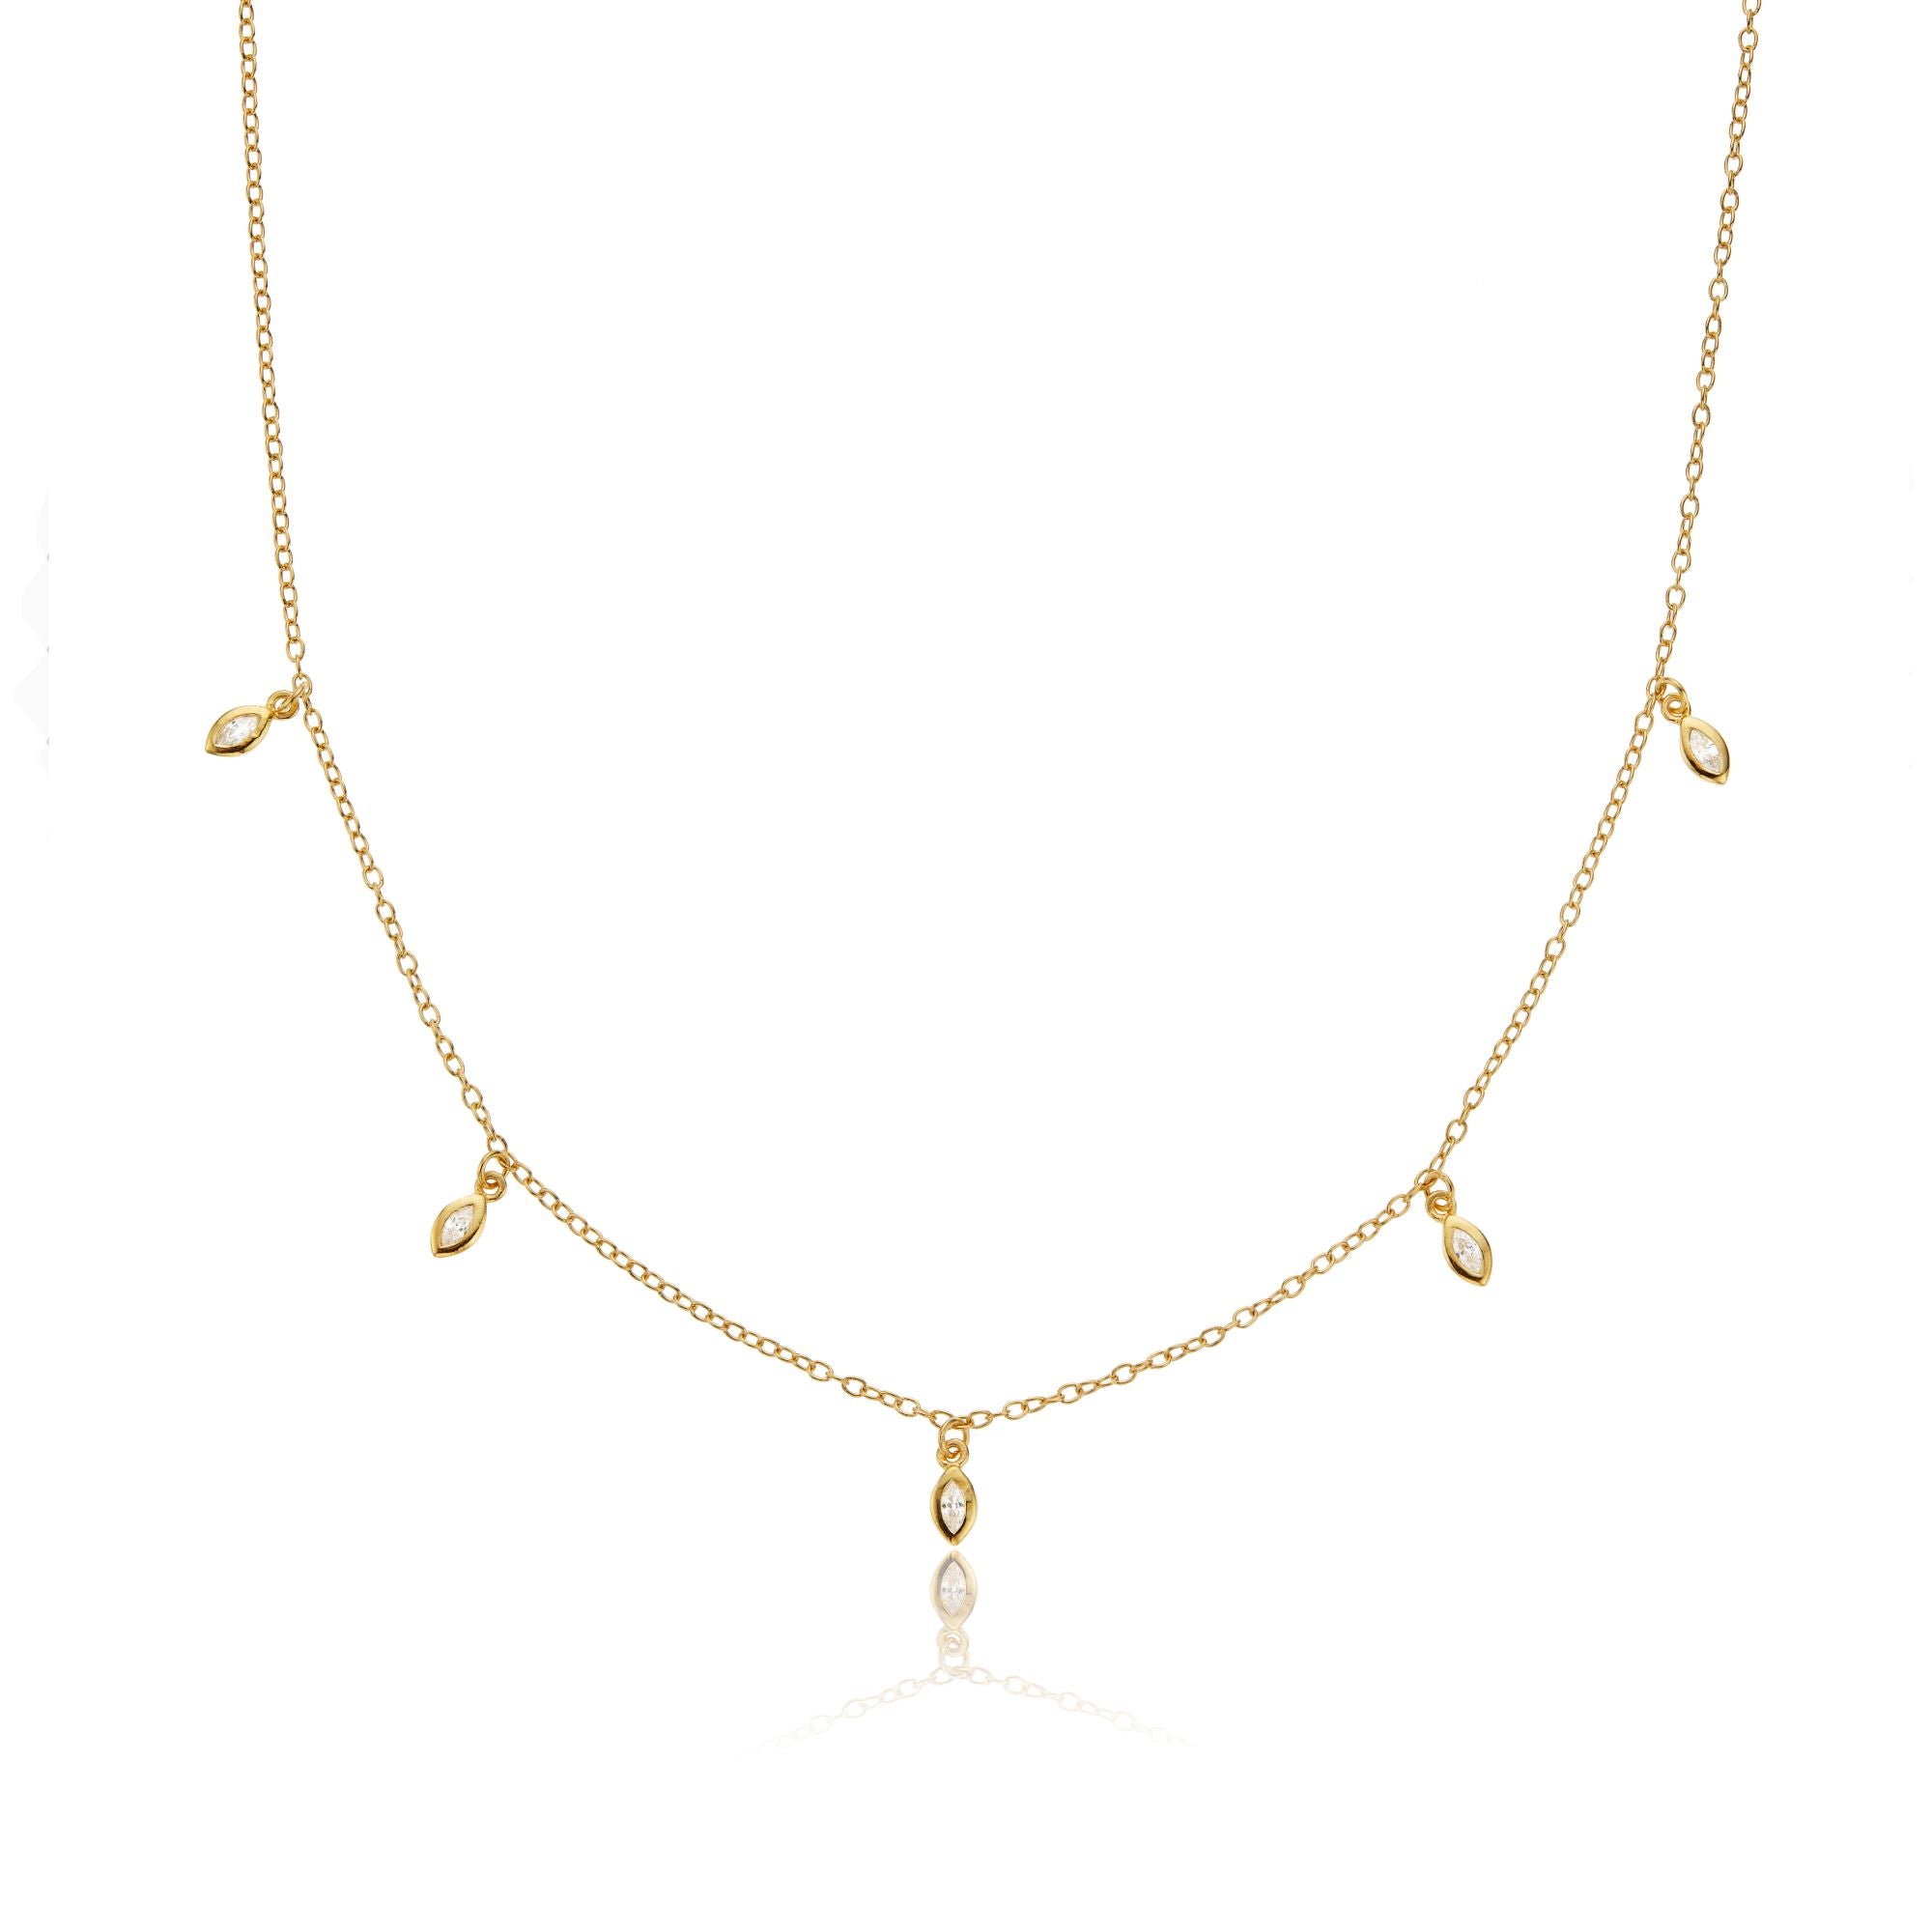 Gold diamond style marquise drop necklace on a white background